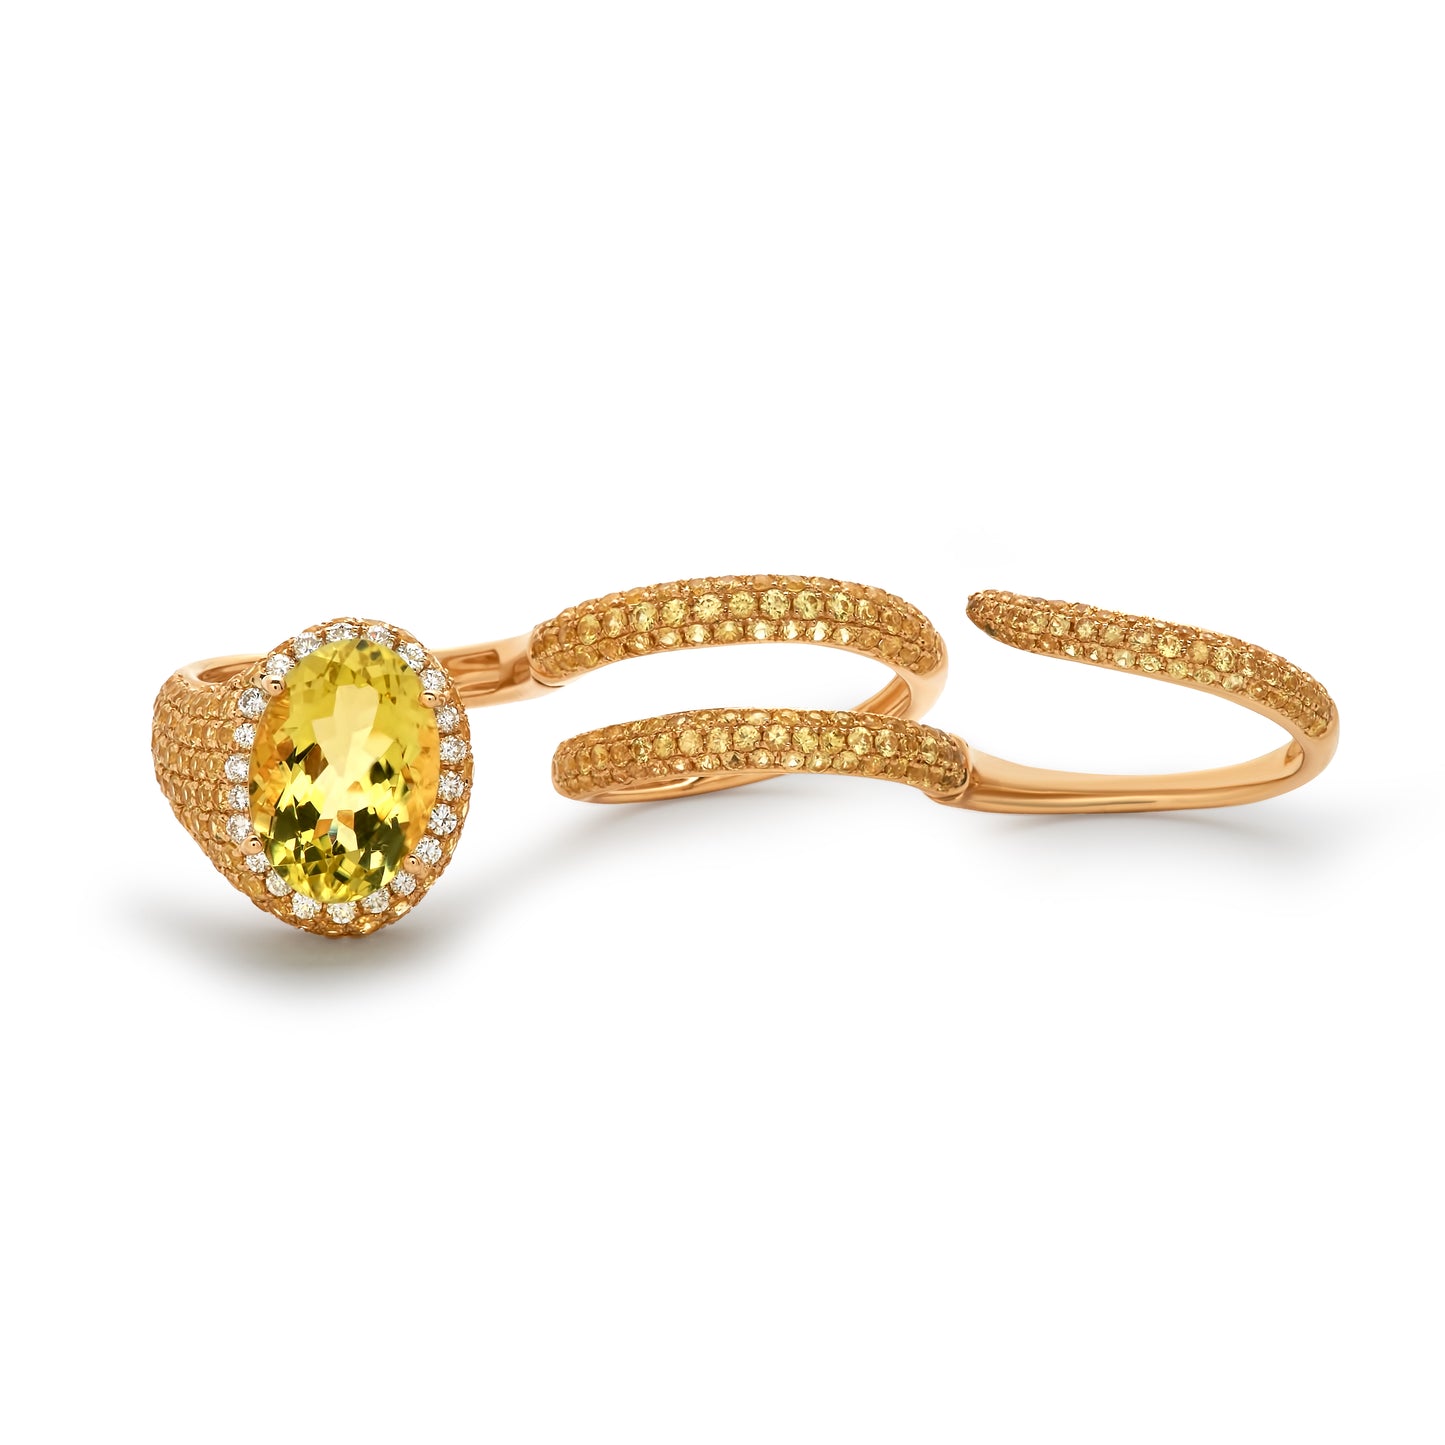 Yellow Gold Lemon Quartz Coiled Ring with White Diamond Halo from Convertible Collection